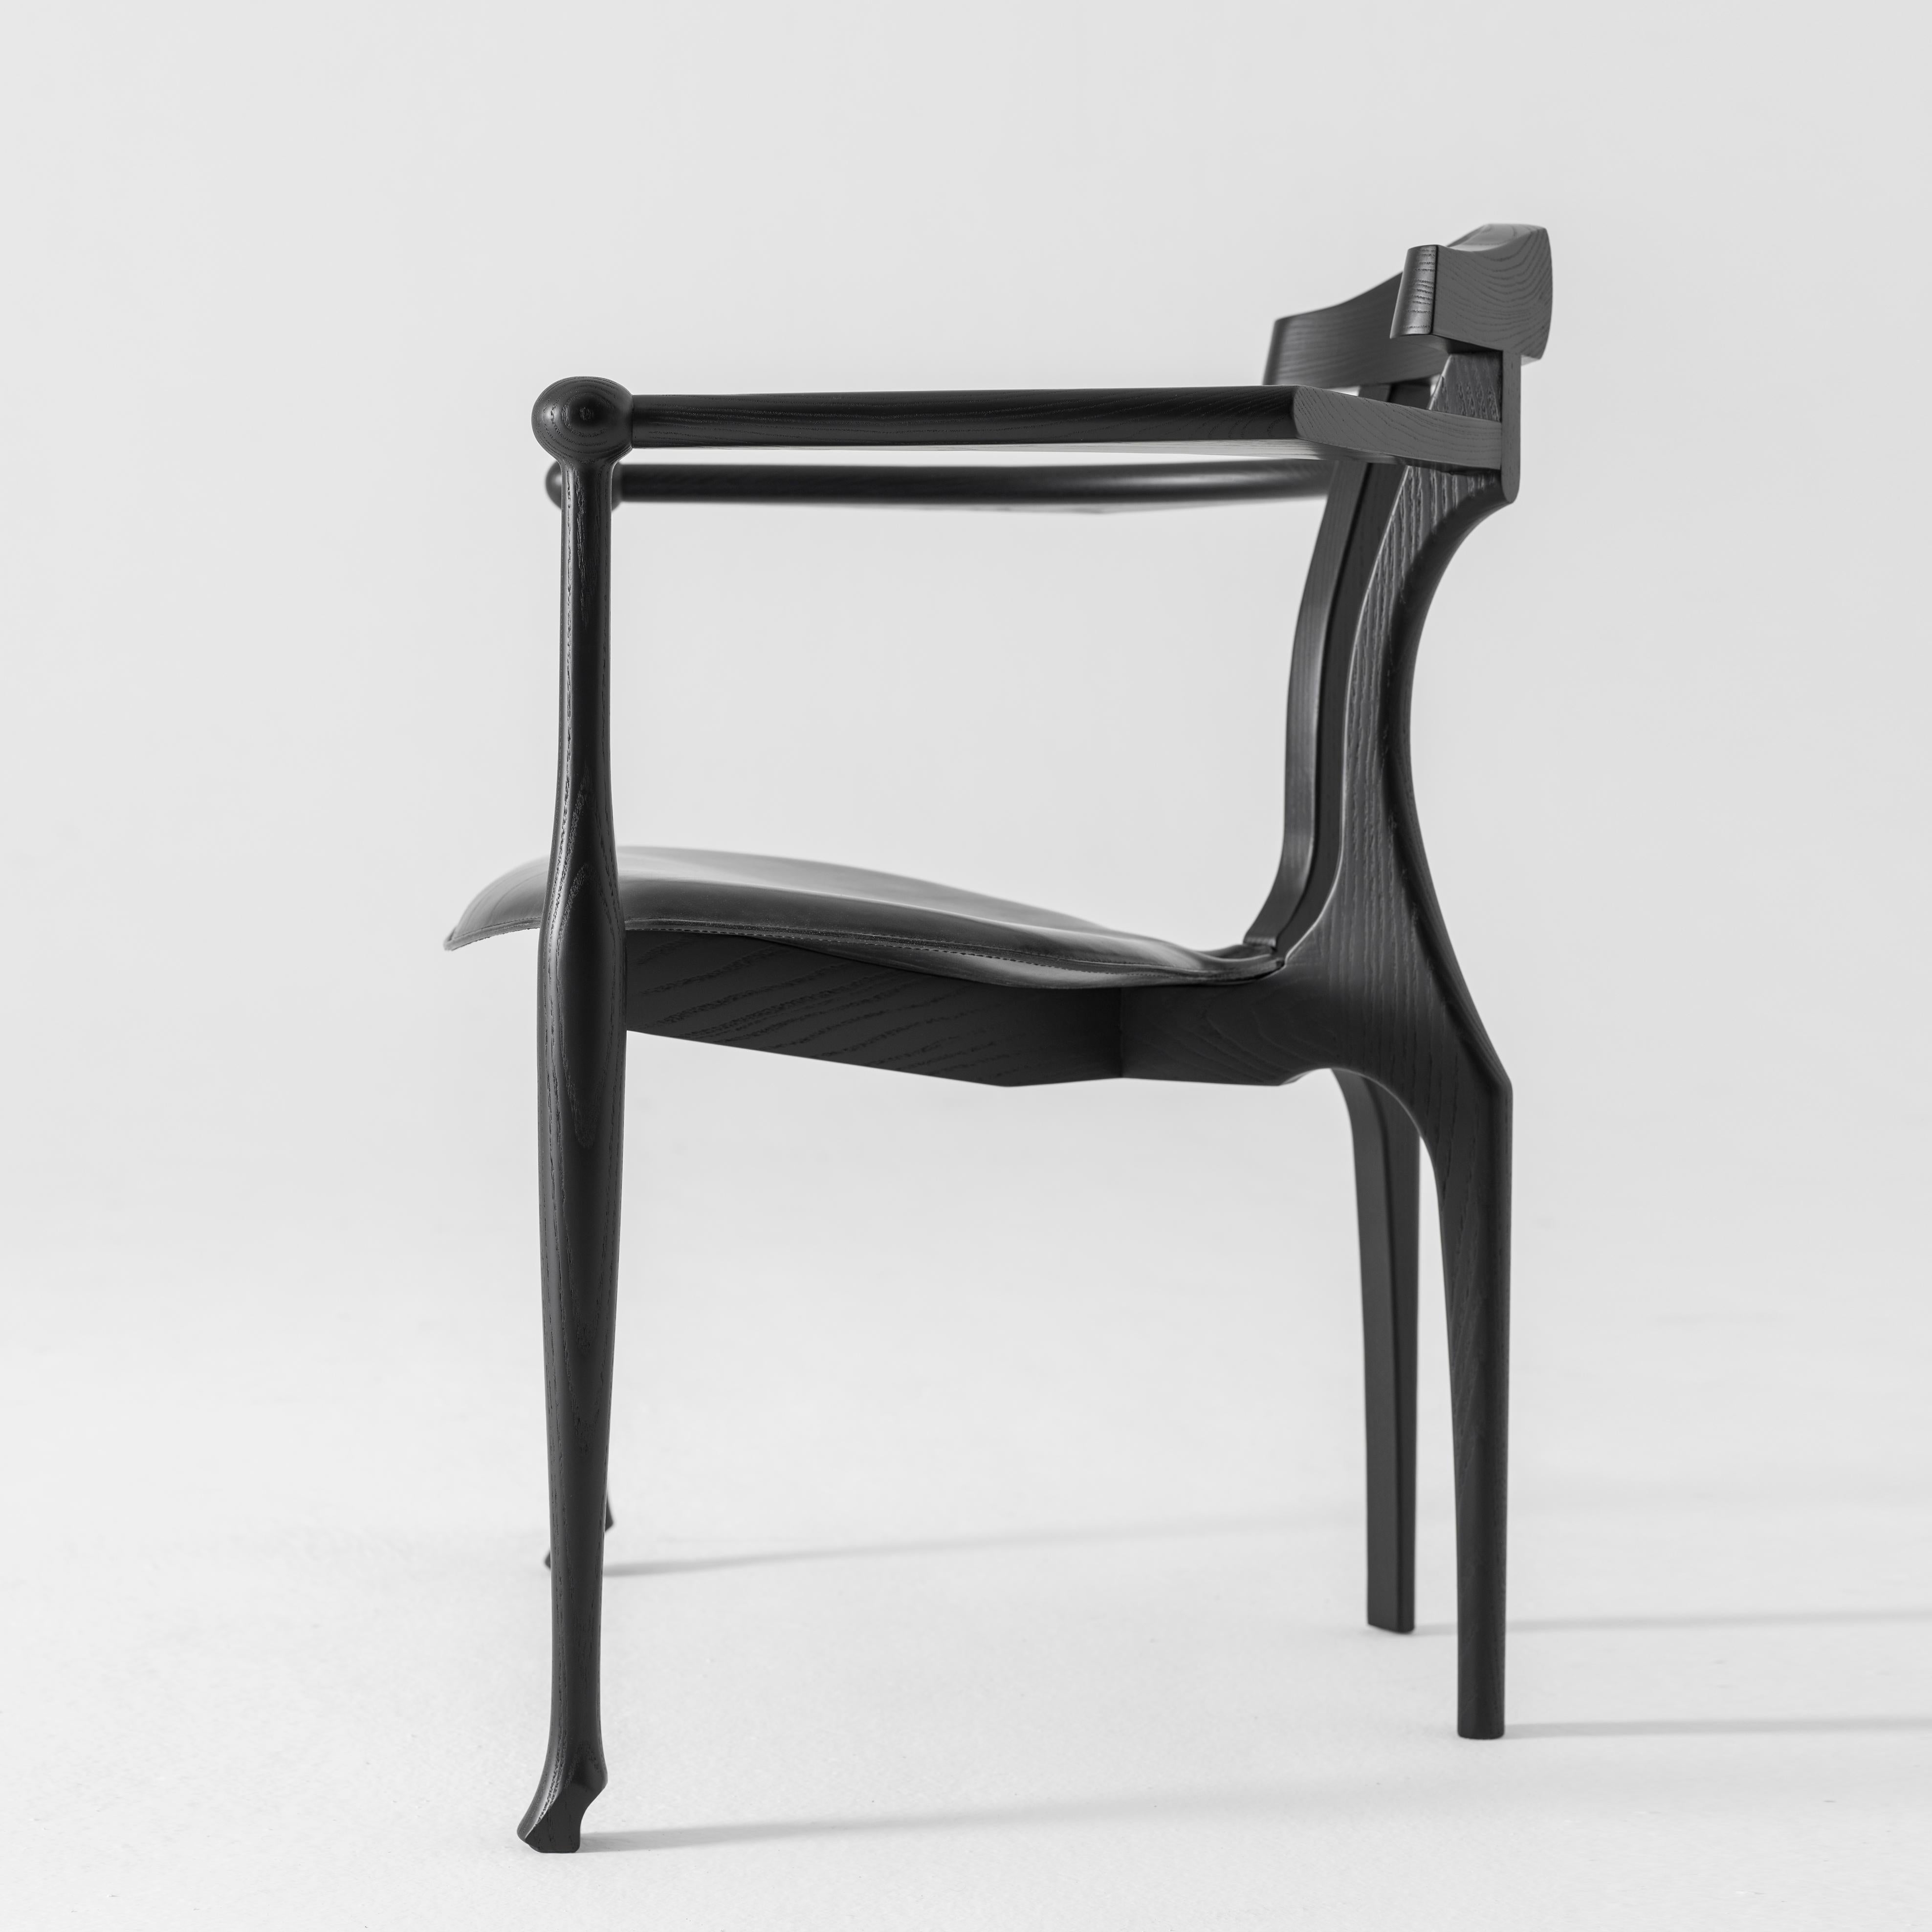 Gaulino easy chair designed by Oscar Tusquets manufactured by BD Barcelona Design.

Solid ash lacquered in black with seat in black hide.


Gaulino chair which, designed in 1987, was selected for the Industrial Design Prize and Adi-Fad in 1989